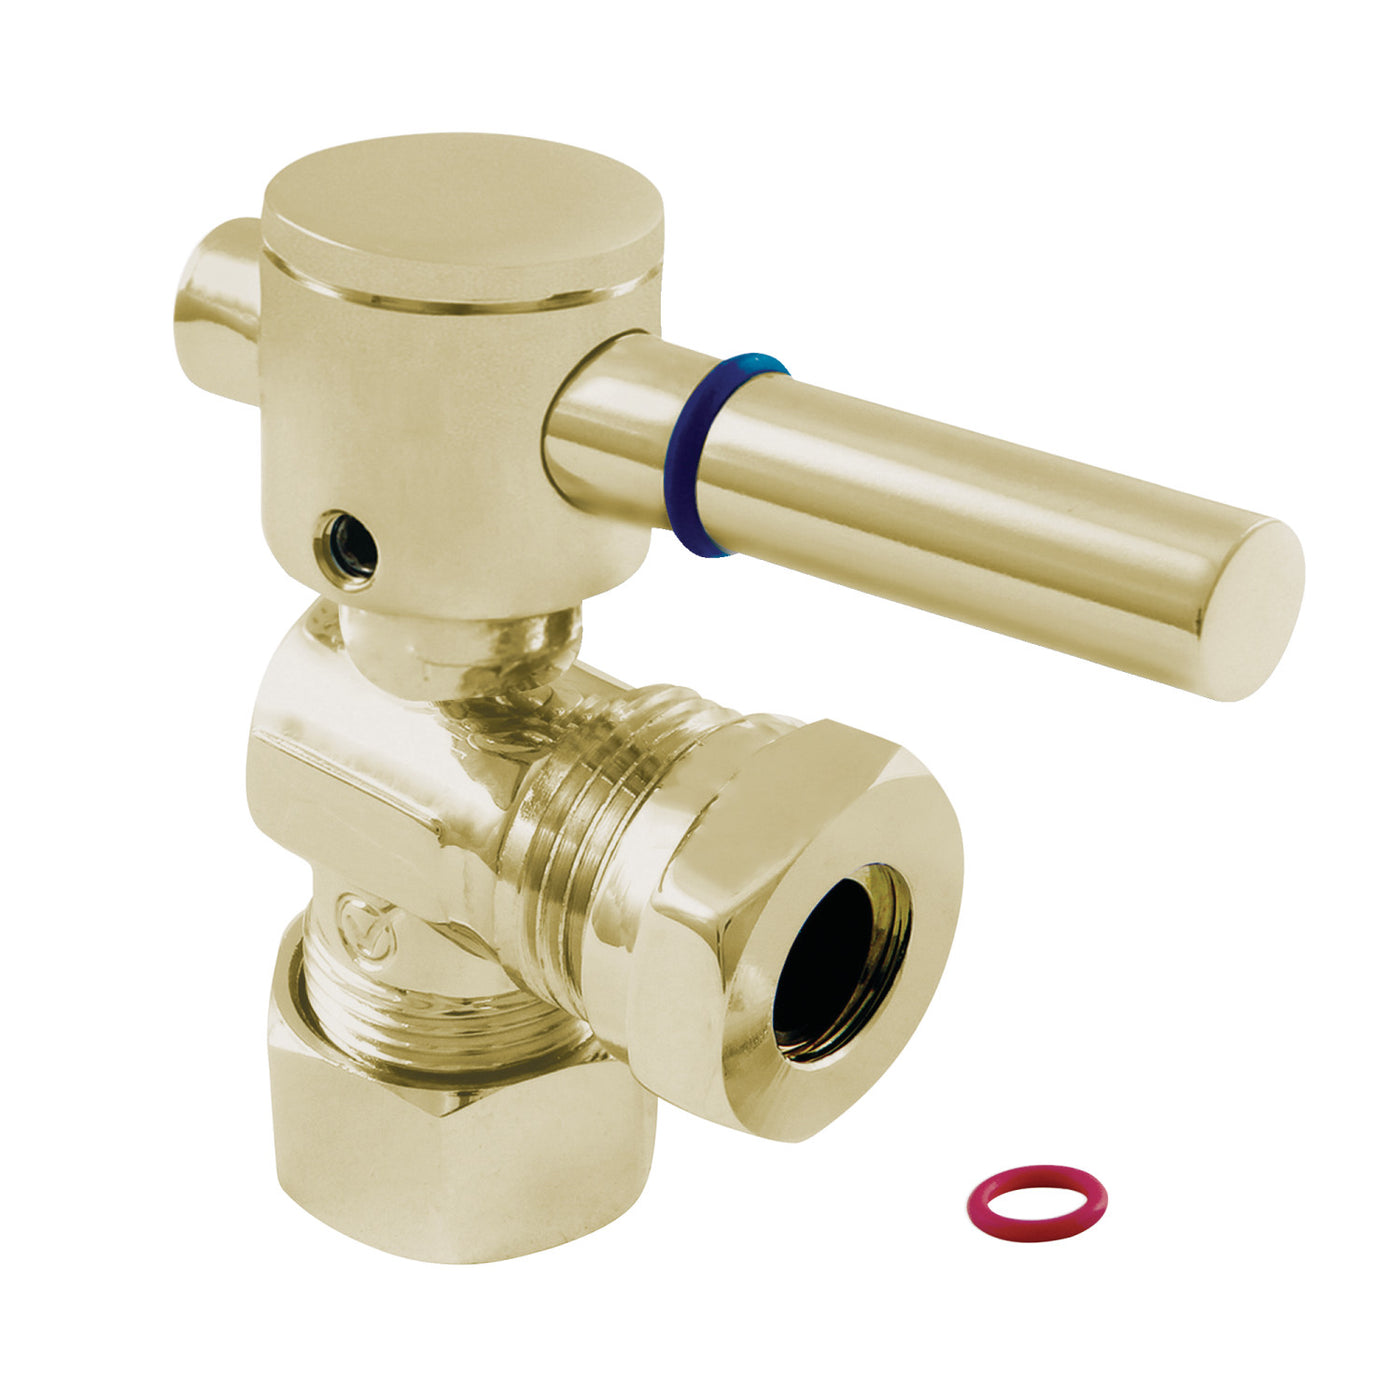 Elements of Design ECC54302DL 5/8-Inch OD Comp x 1/2-Inch or 7/16-Inch Slip Joint Angle Stop Valve, Polished Brass